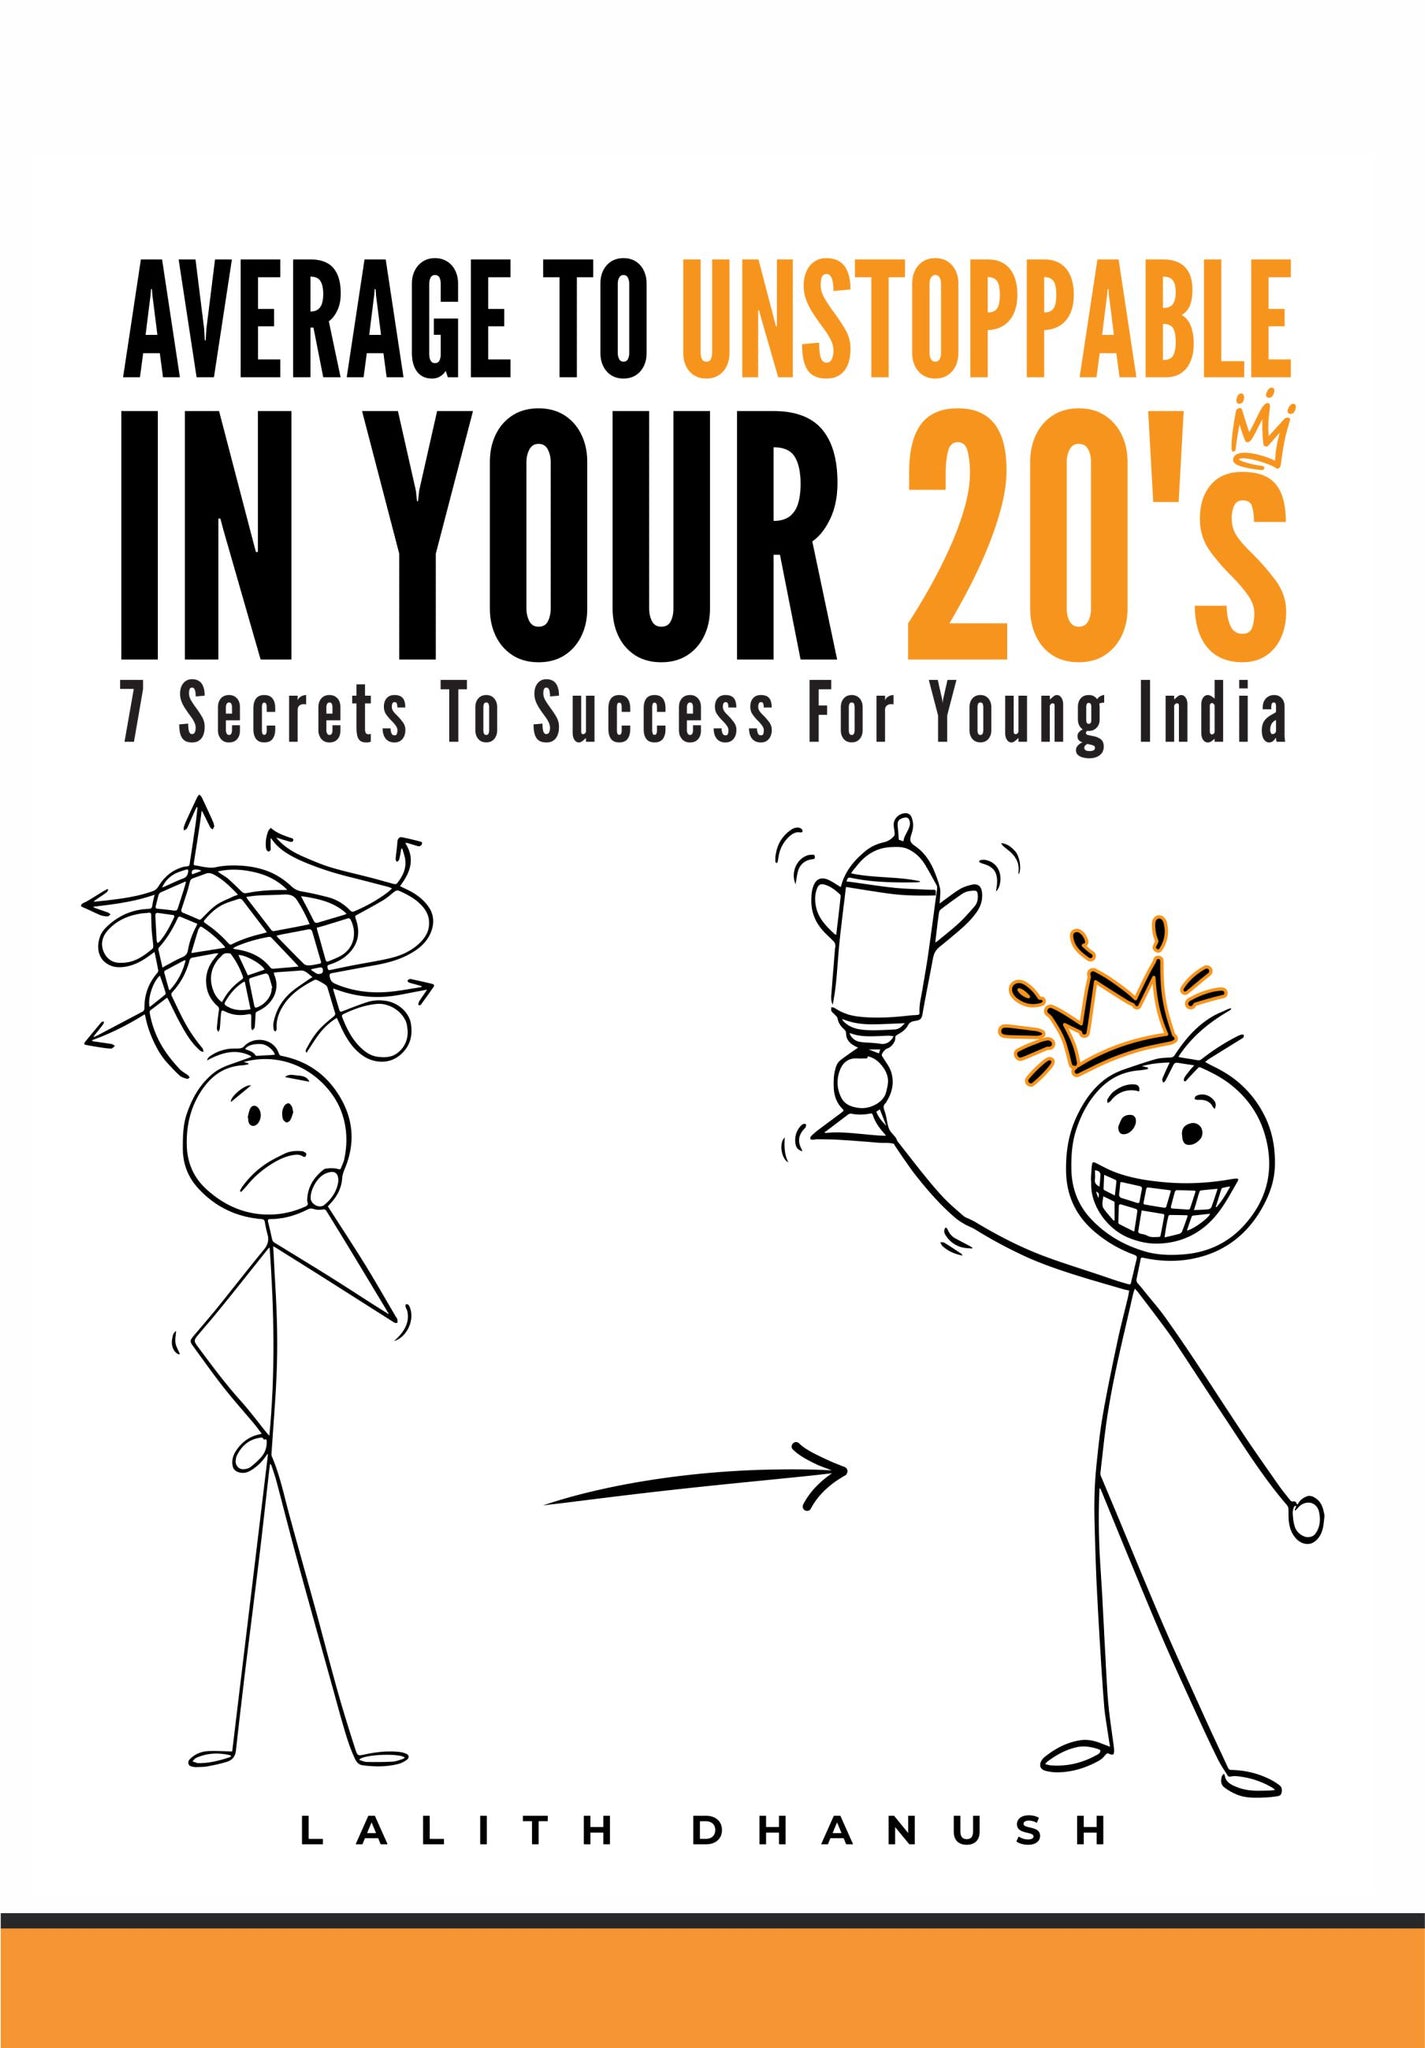 AVERAGE TO UNSTOPPABLE IN YOUR 20'S